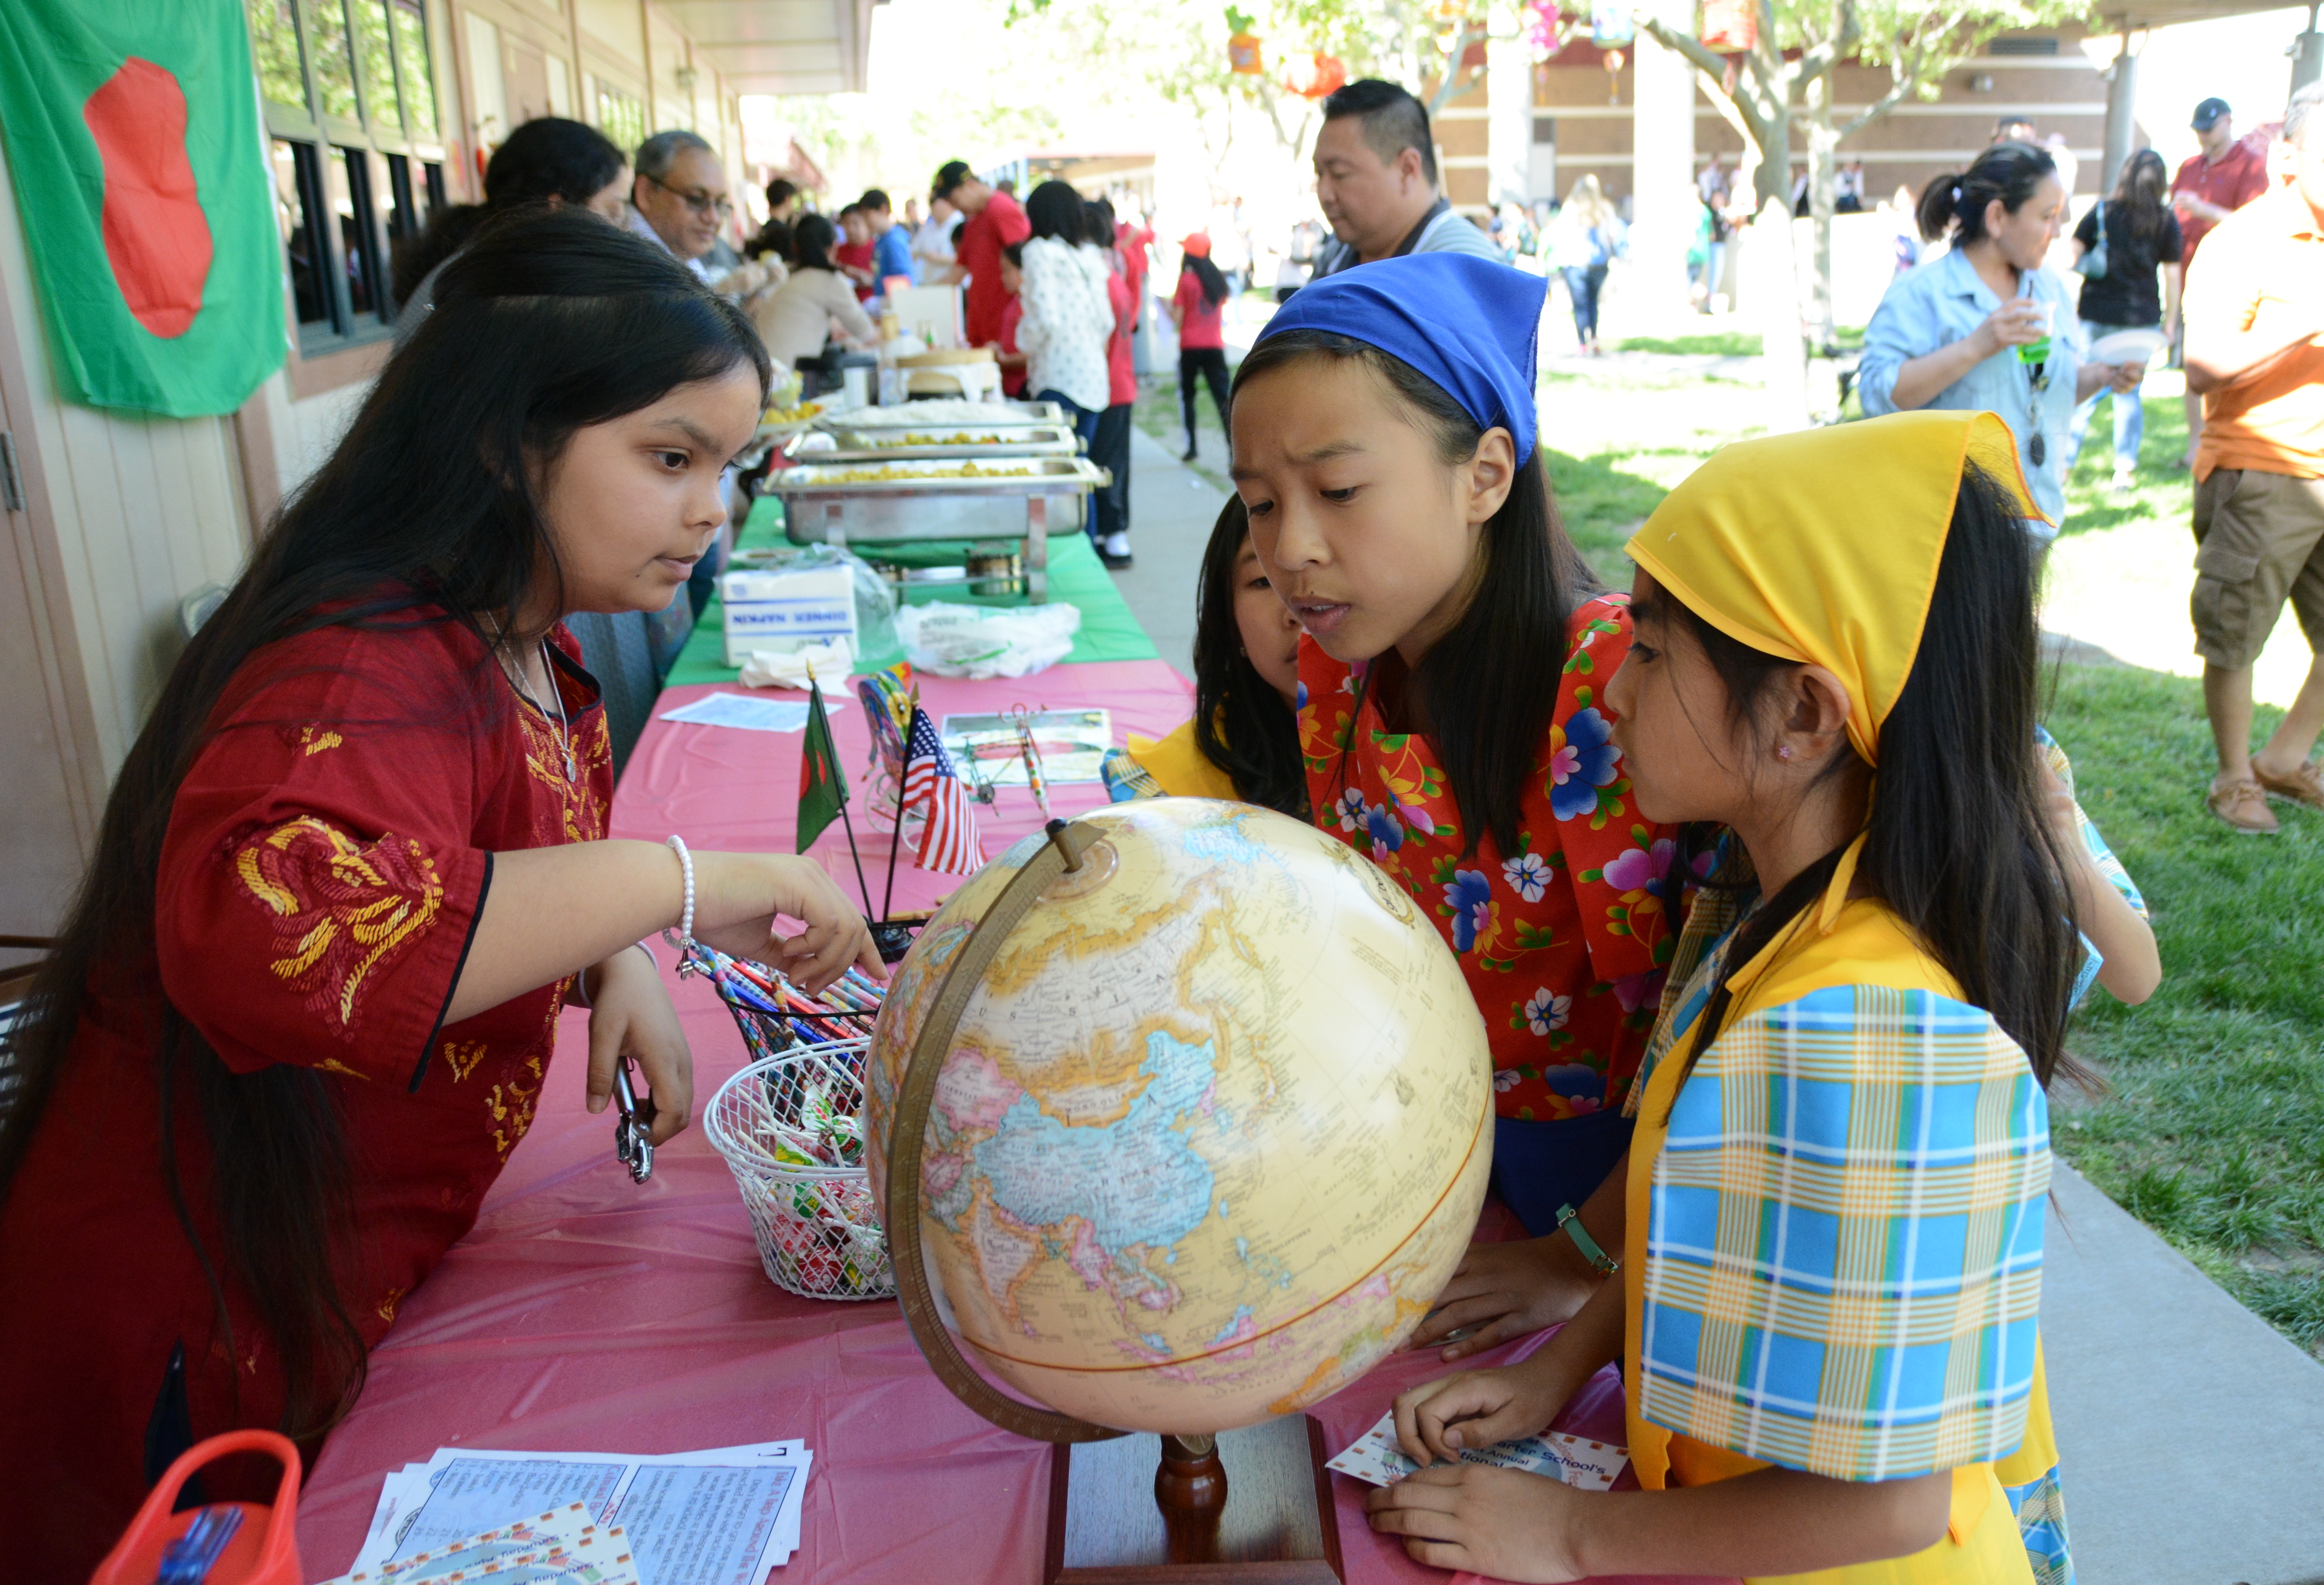 The International Festival was a great culminating event for our Month of Global Perspective.  Thank you to all the volunteers who made this event possible!